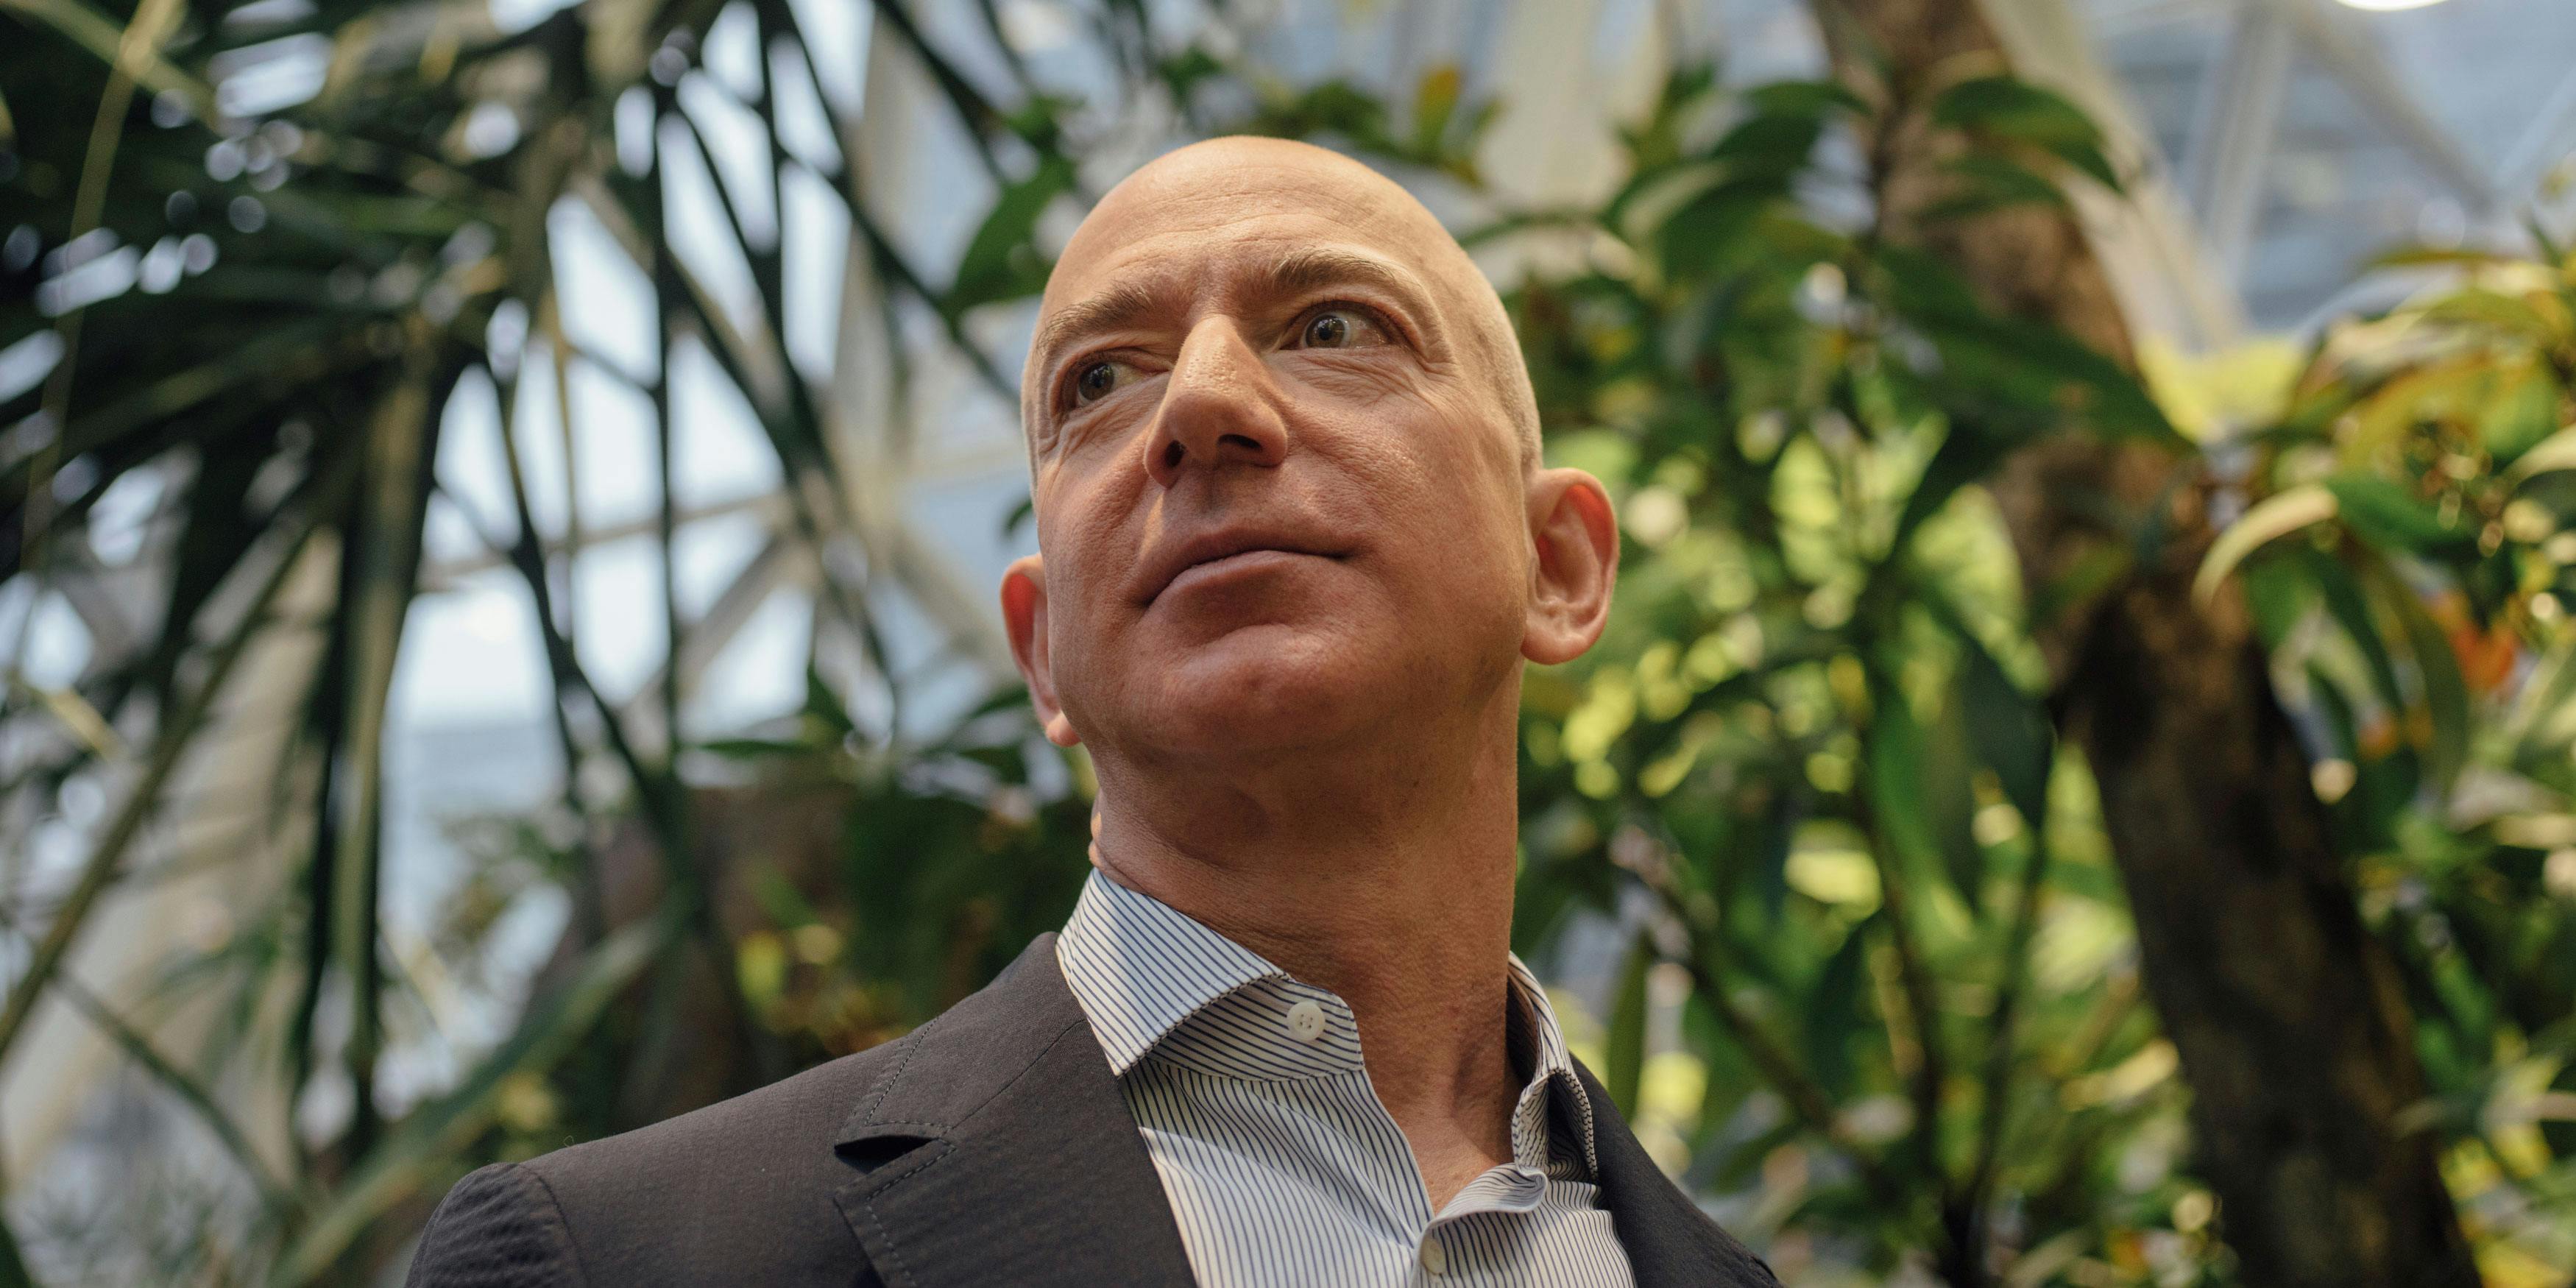 Amazon is donating money to NORML to legalize weed. Here, CEO and Founder Jeff Bezos is taken on a tour of the plants around The Spheres during the grand opening at the Amazon Spheres in Seattle, Washington on January 29, 2018.